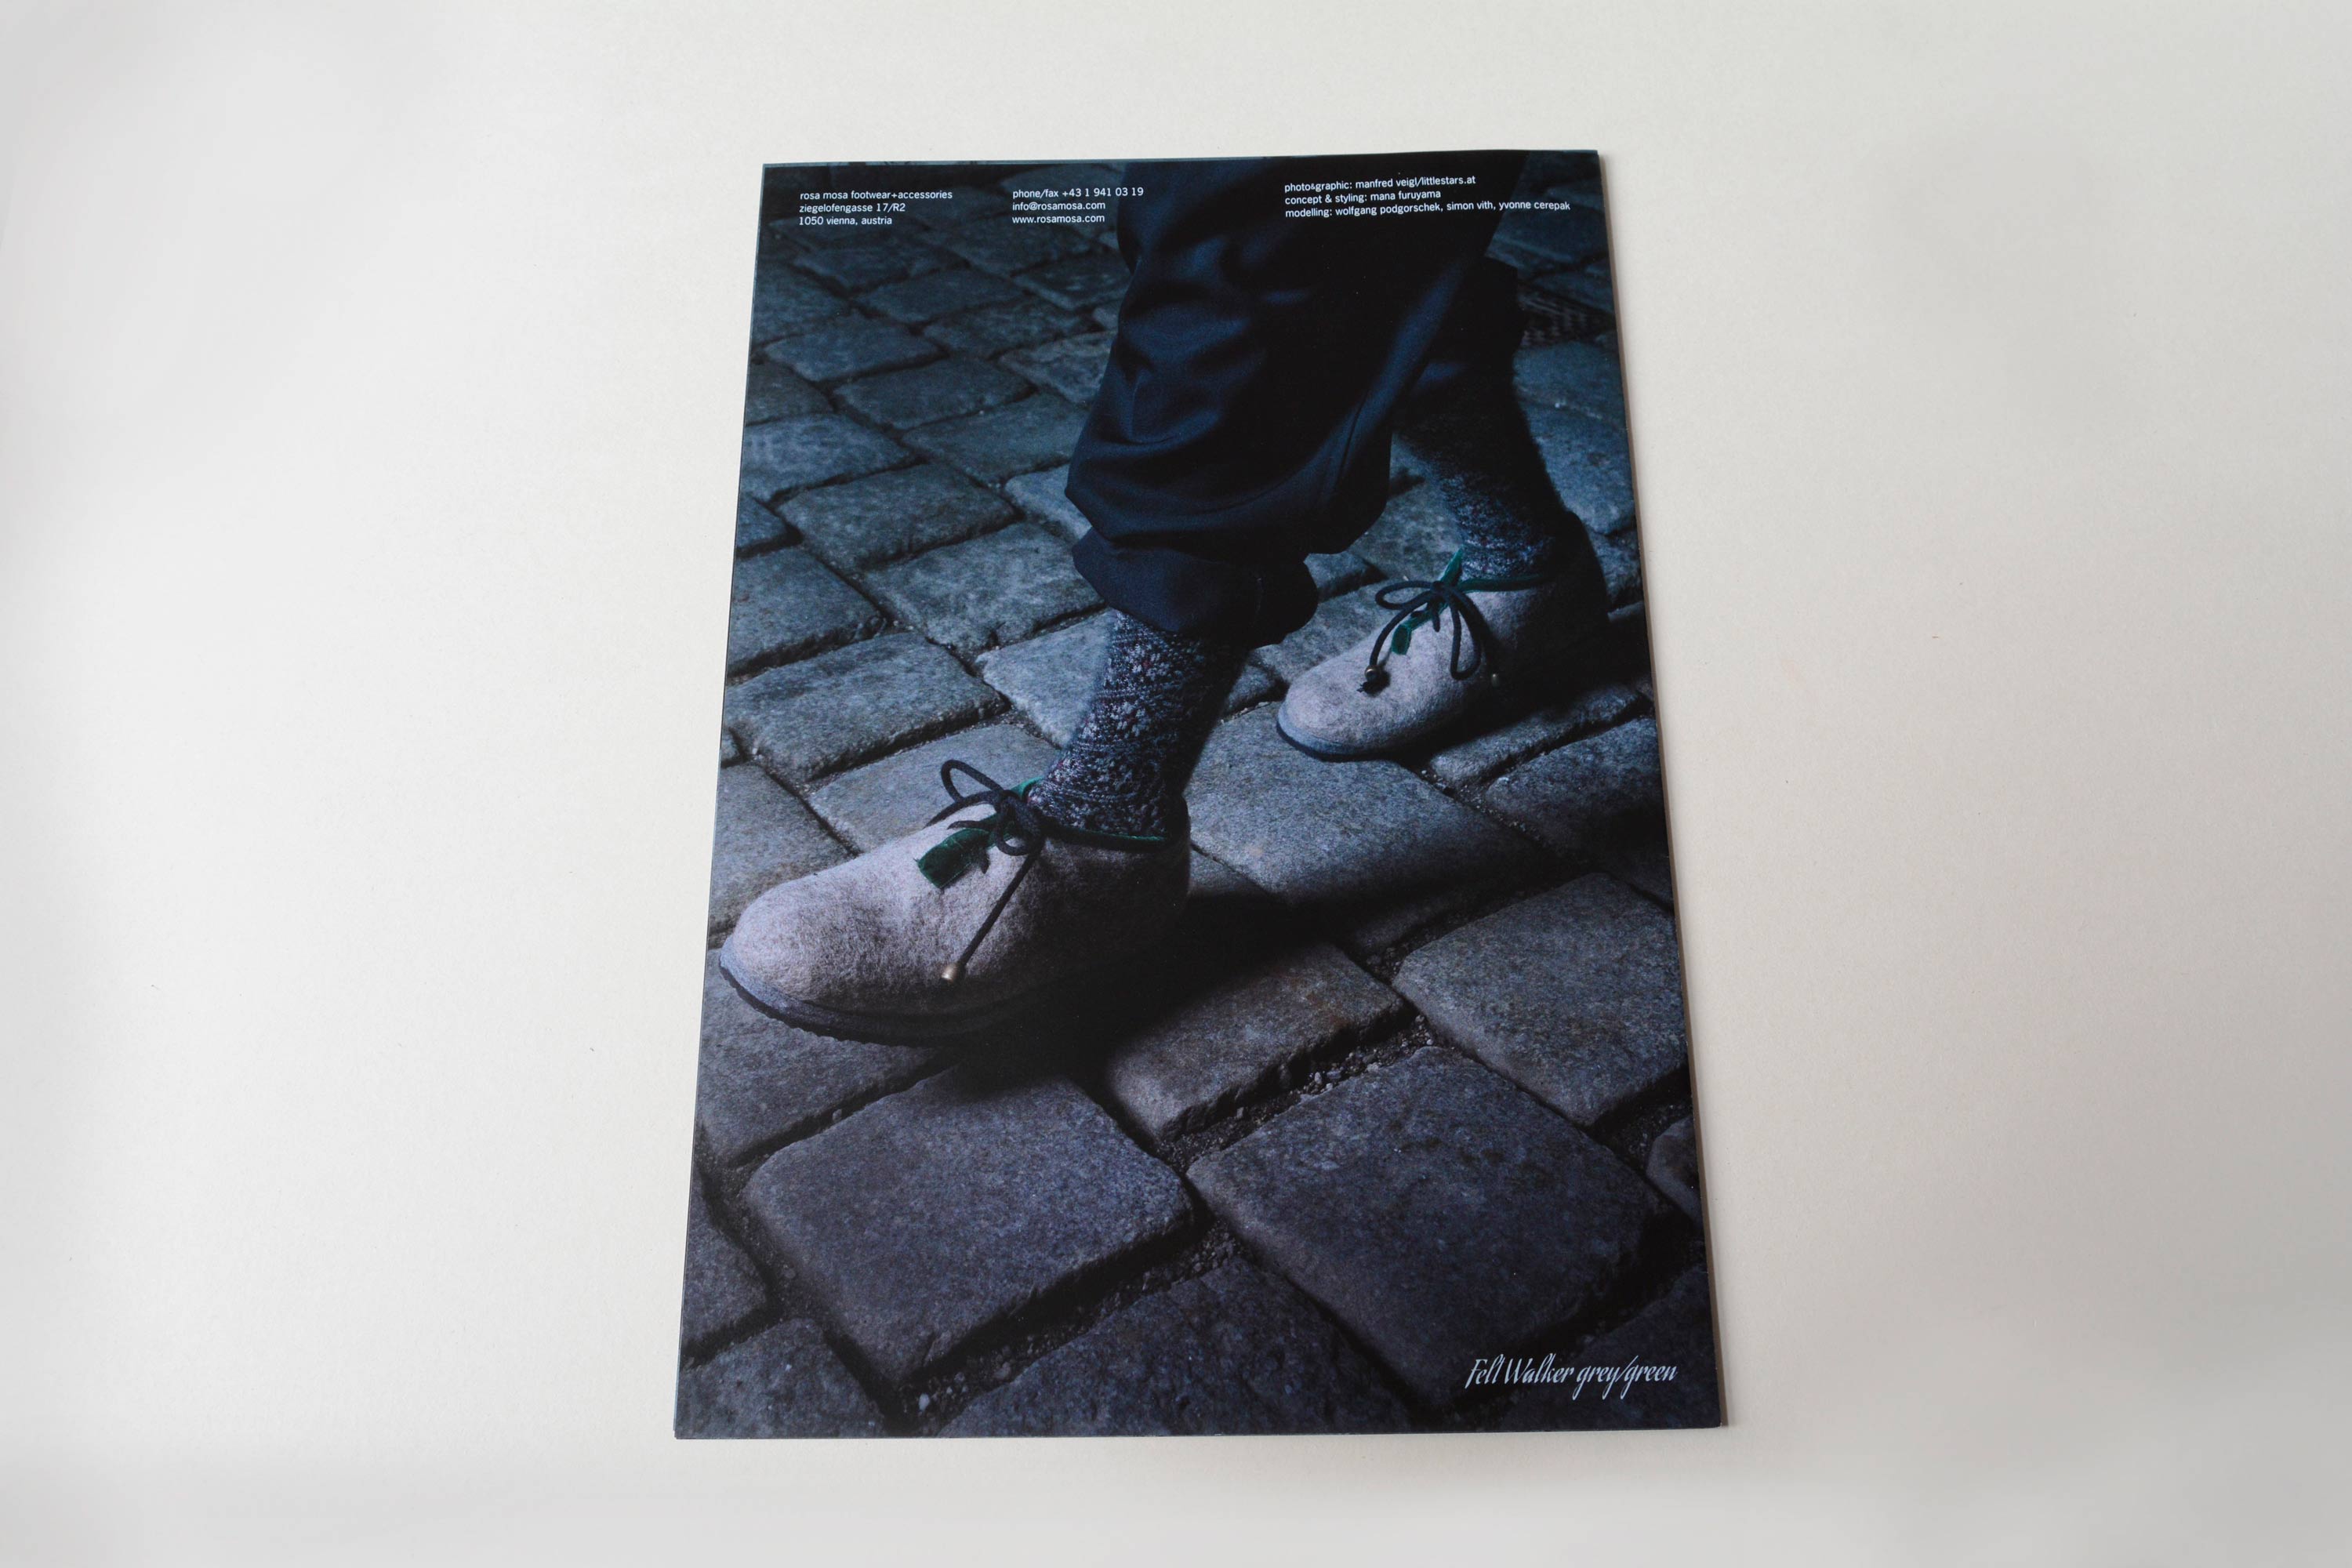 Back catalogue. Full-page close-up photo of feet in shoes walking on coblestone. Small text blocks overlayed at top.